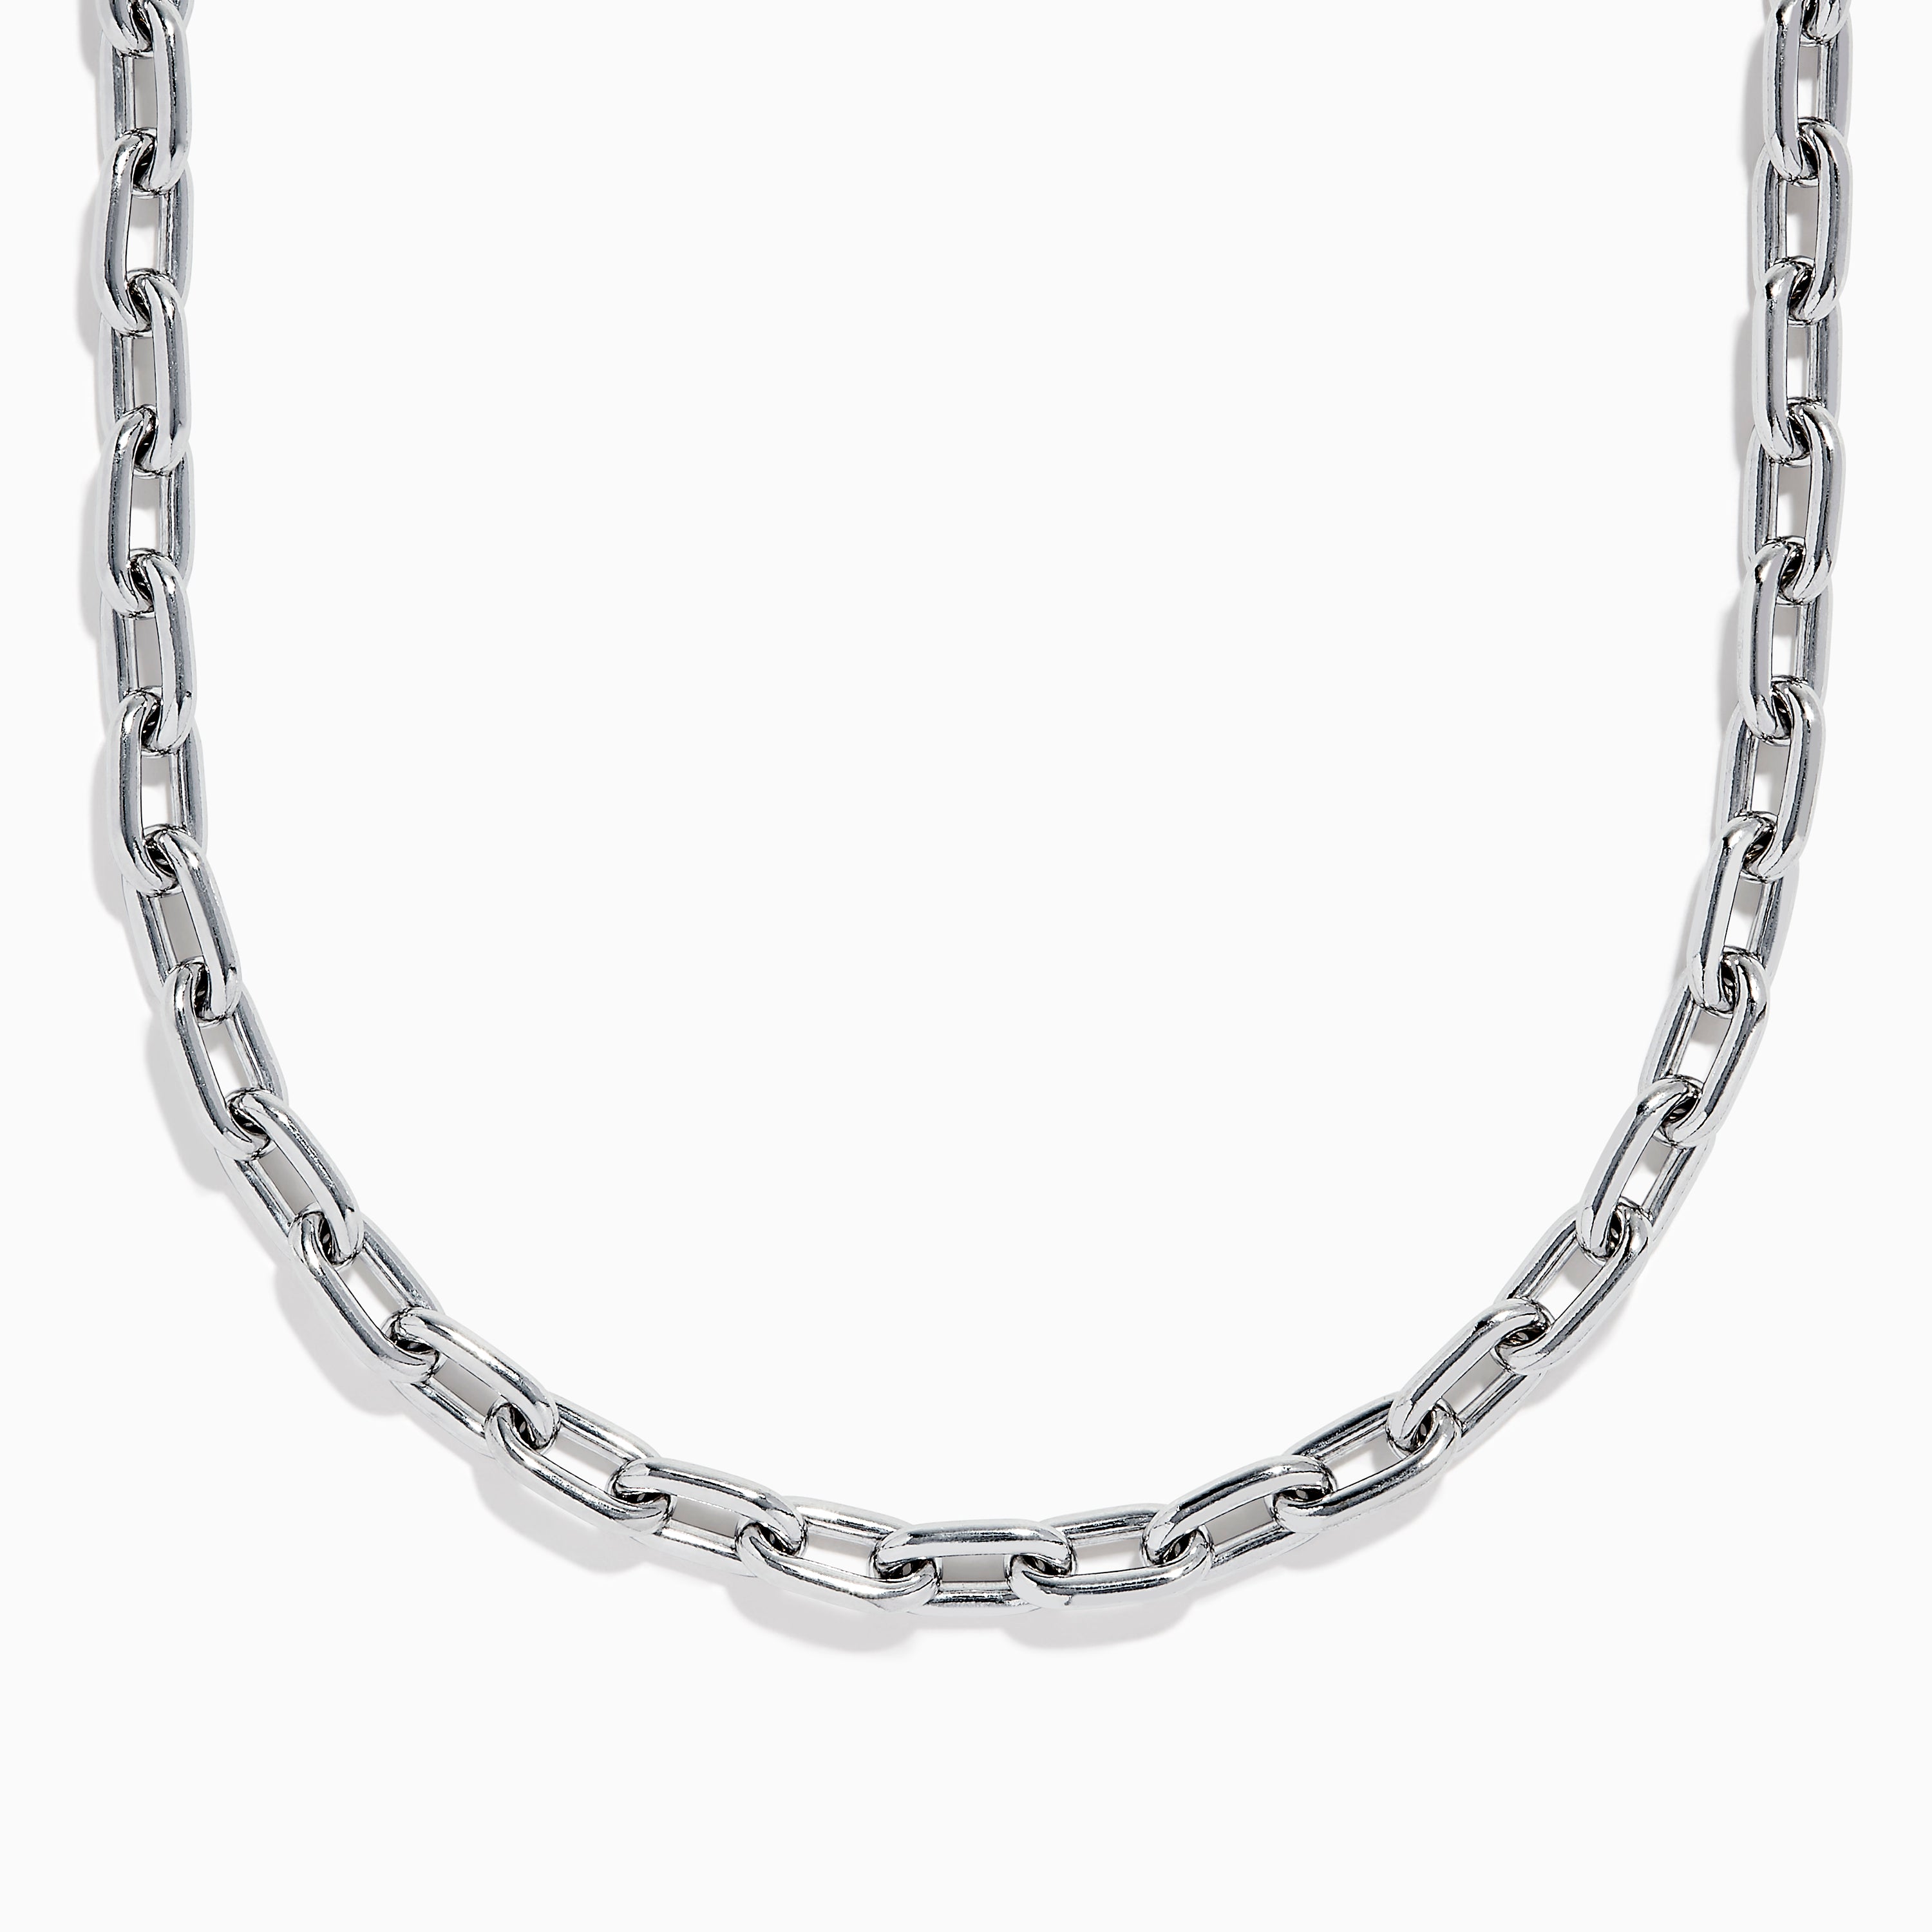 Effy Men's 925 Sterling Silver Paperchain Necklace